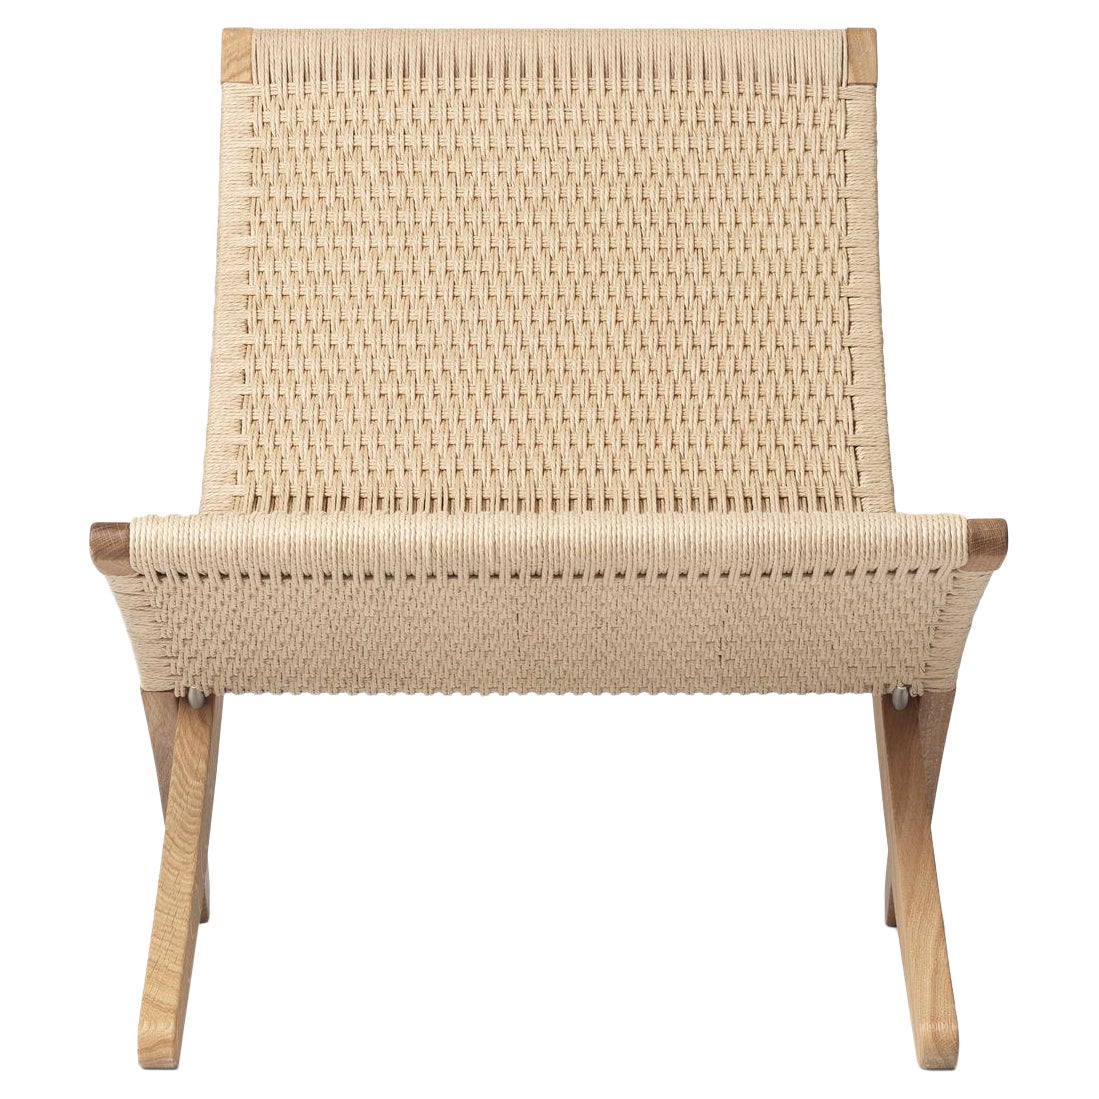 MG501 Cuba Chair in Oak Oil Finish Wood Frame with Natural Papercord Seat